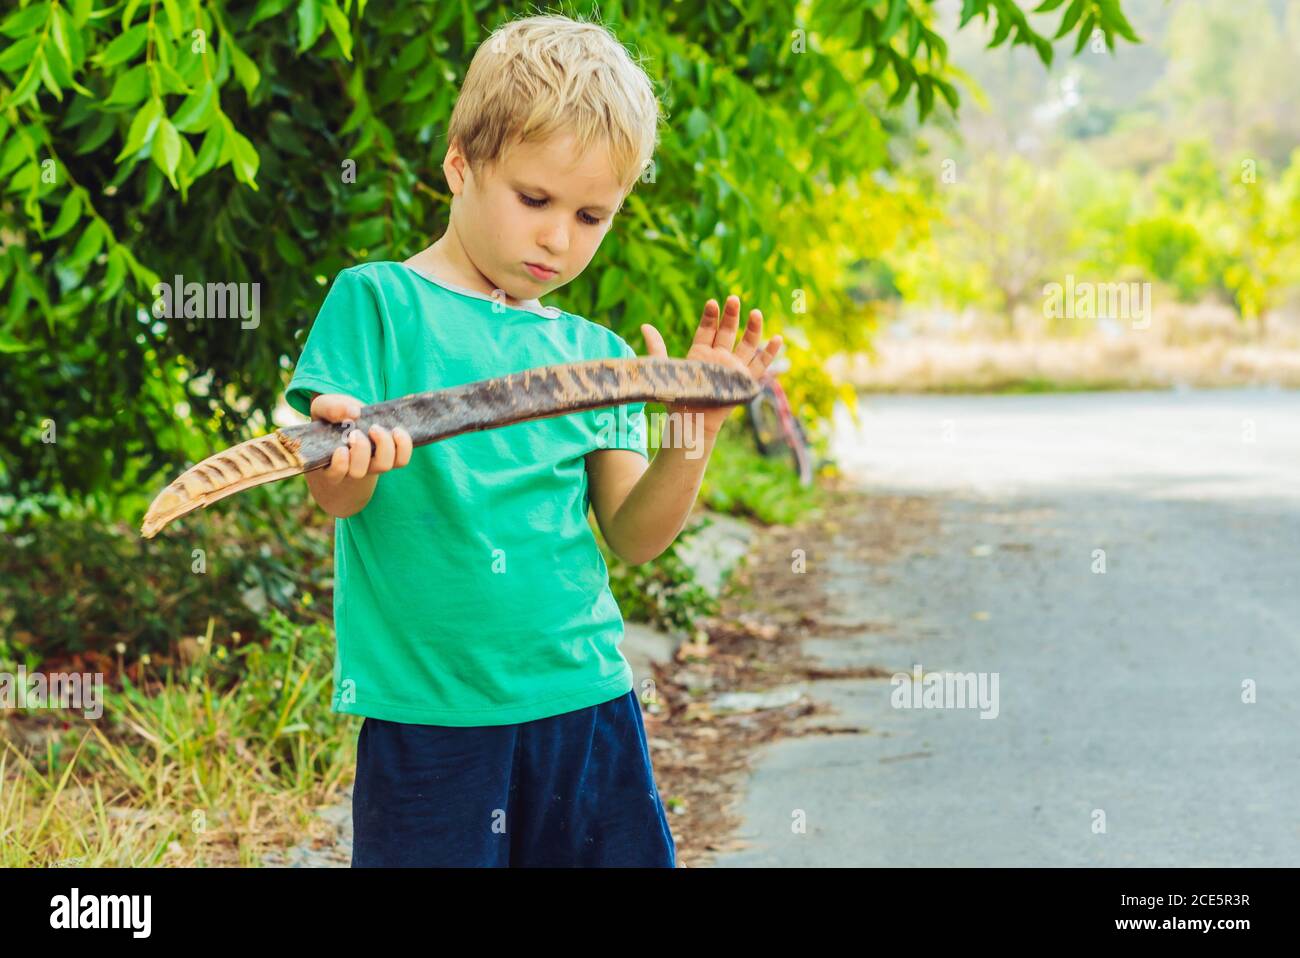 Blond mischievous boy prankster with freckles examines play with large wooden pod, artistic emotions facial expression gesturing. Family relationship Stock Photo